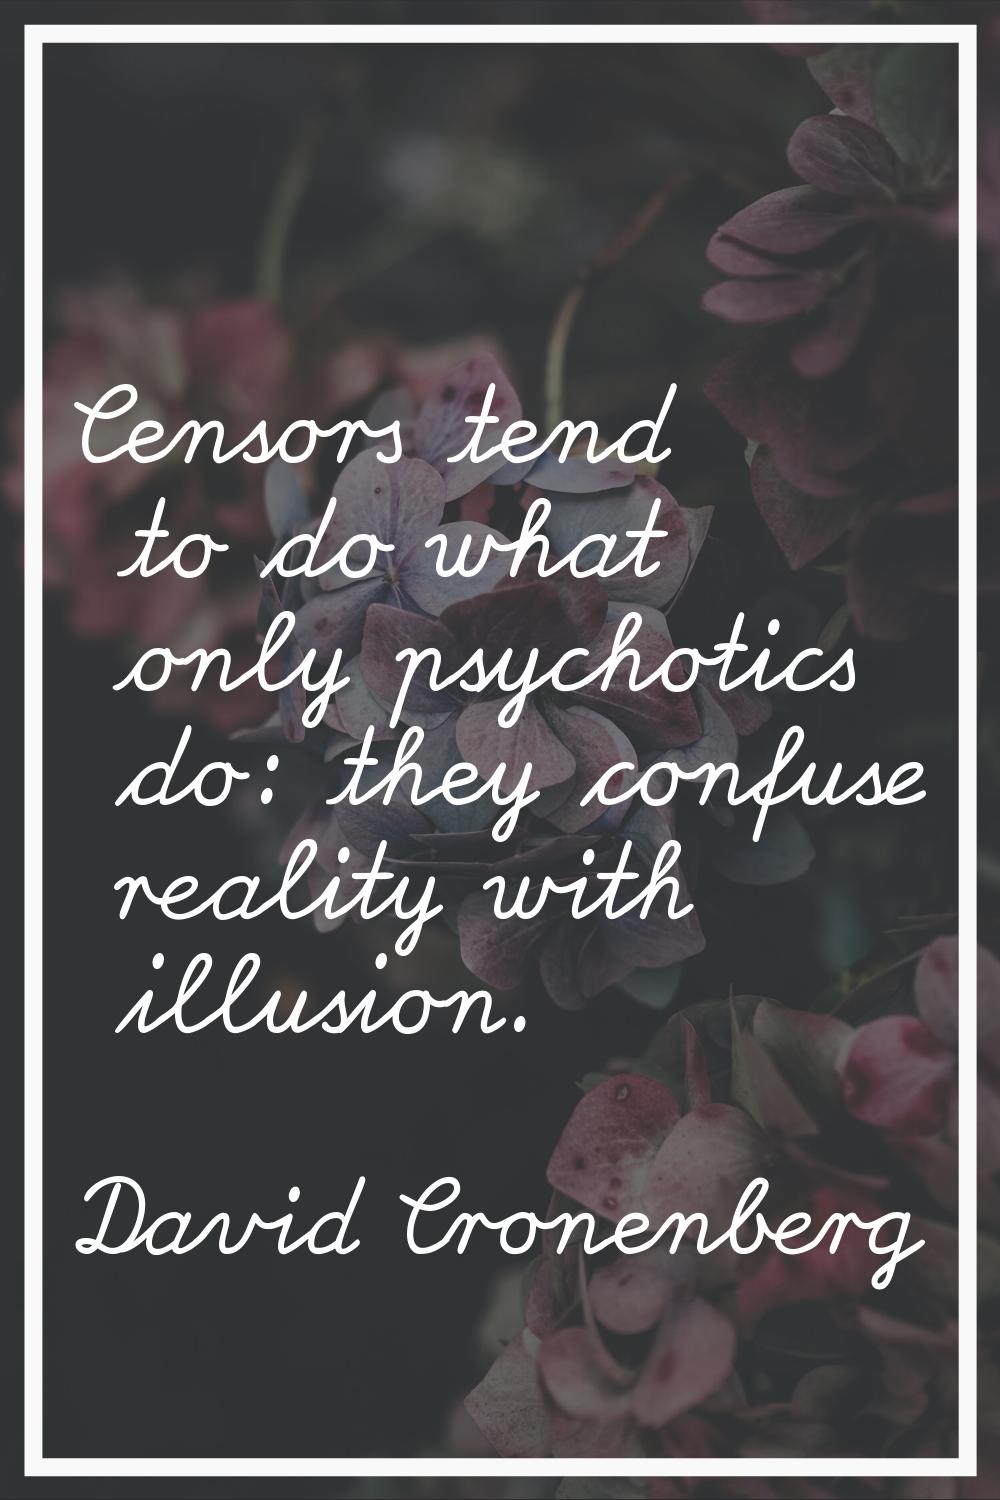 Censors tend to do what only psychotics do: they confuse reality with illusion.